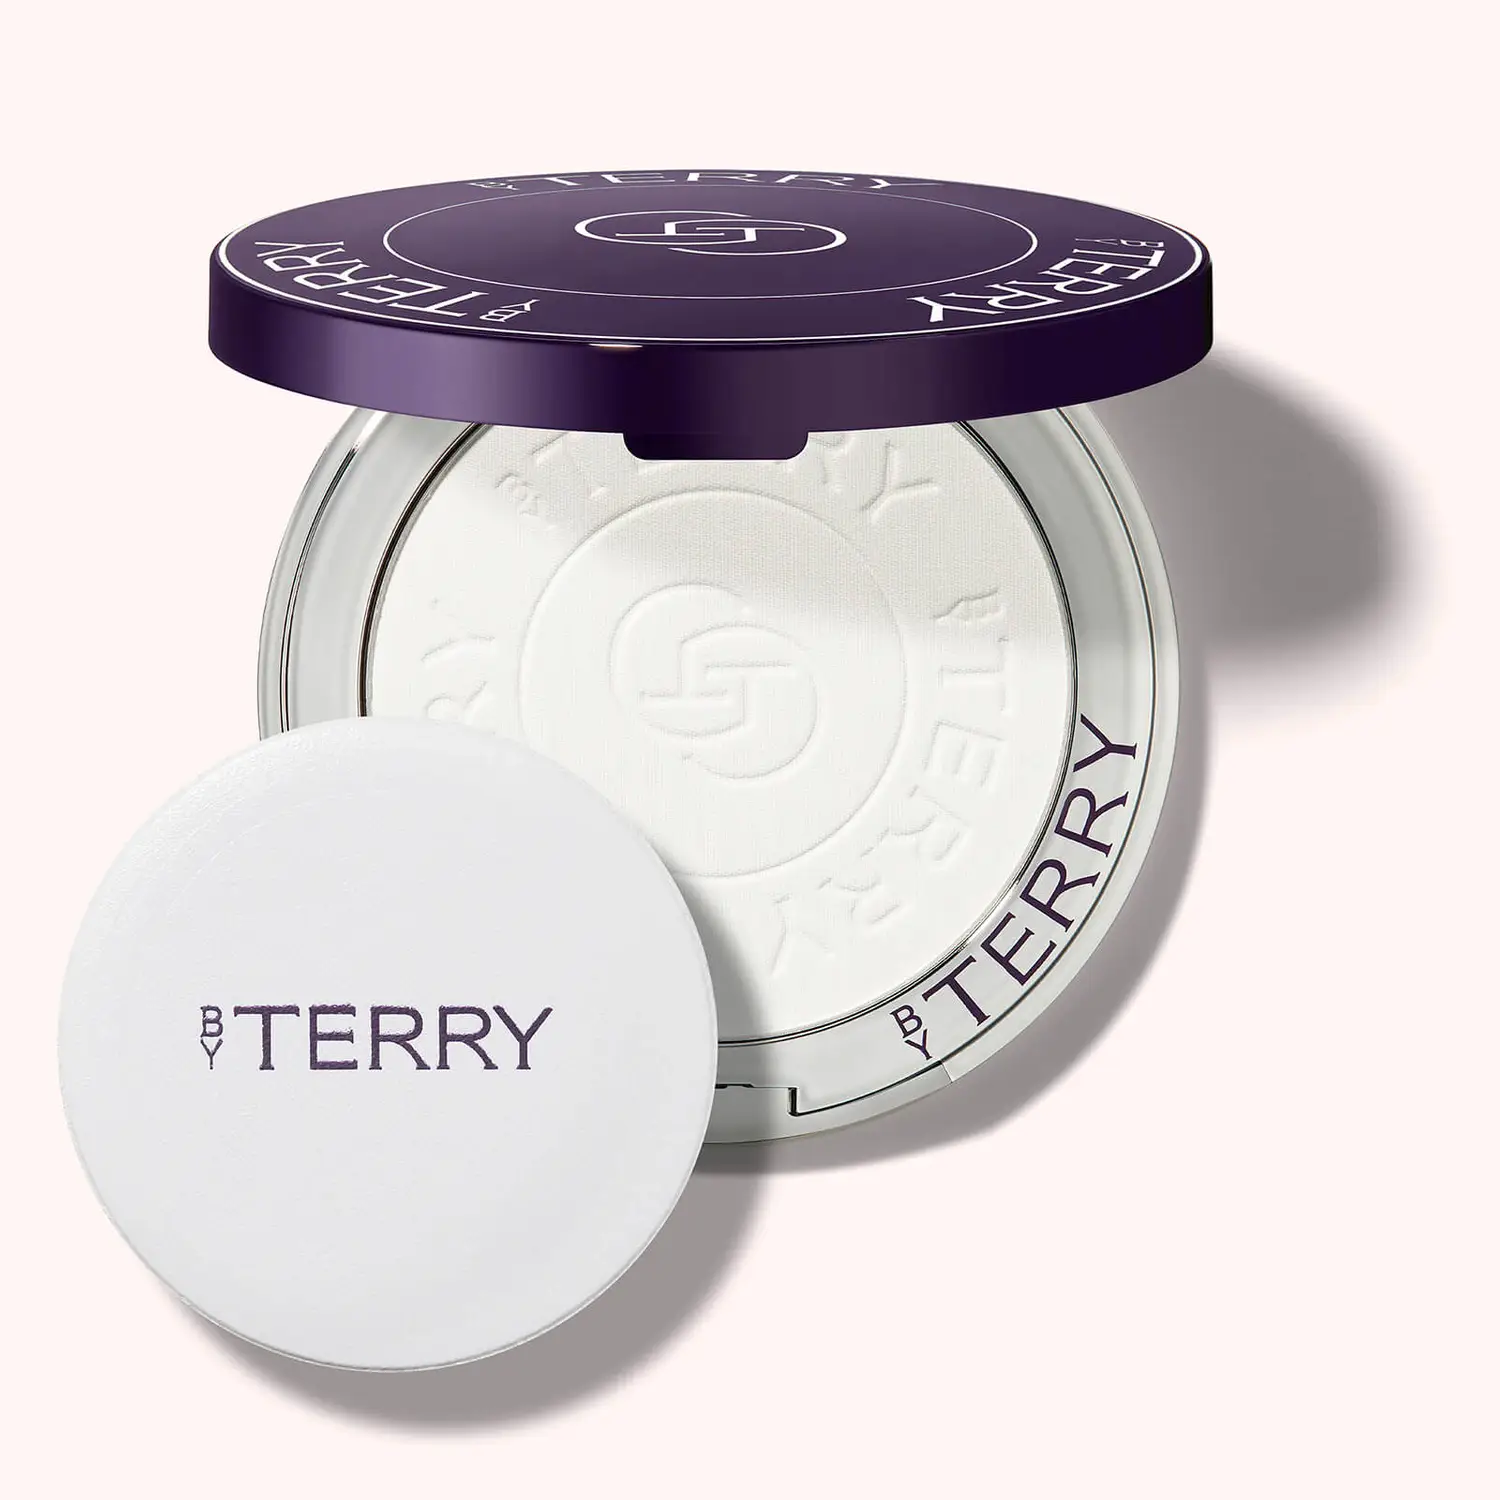 By Terry Hyaluronic Hydra Pressed Powder £38.00 at Cult Beauty